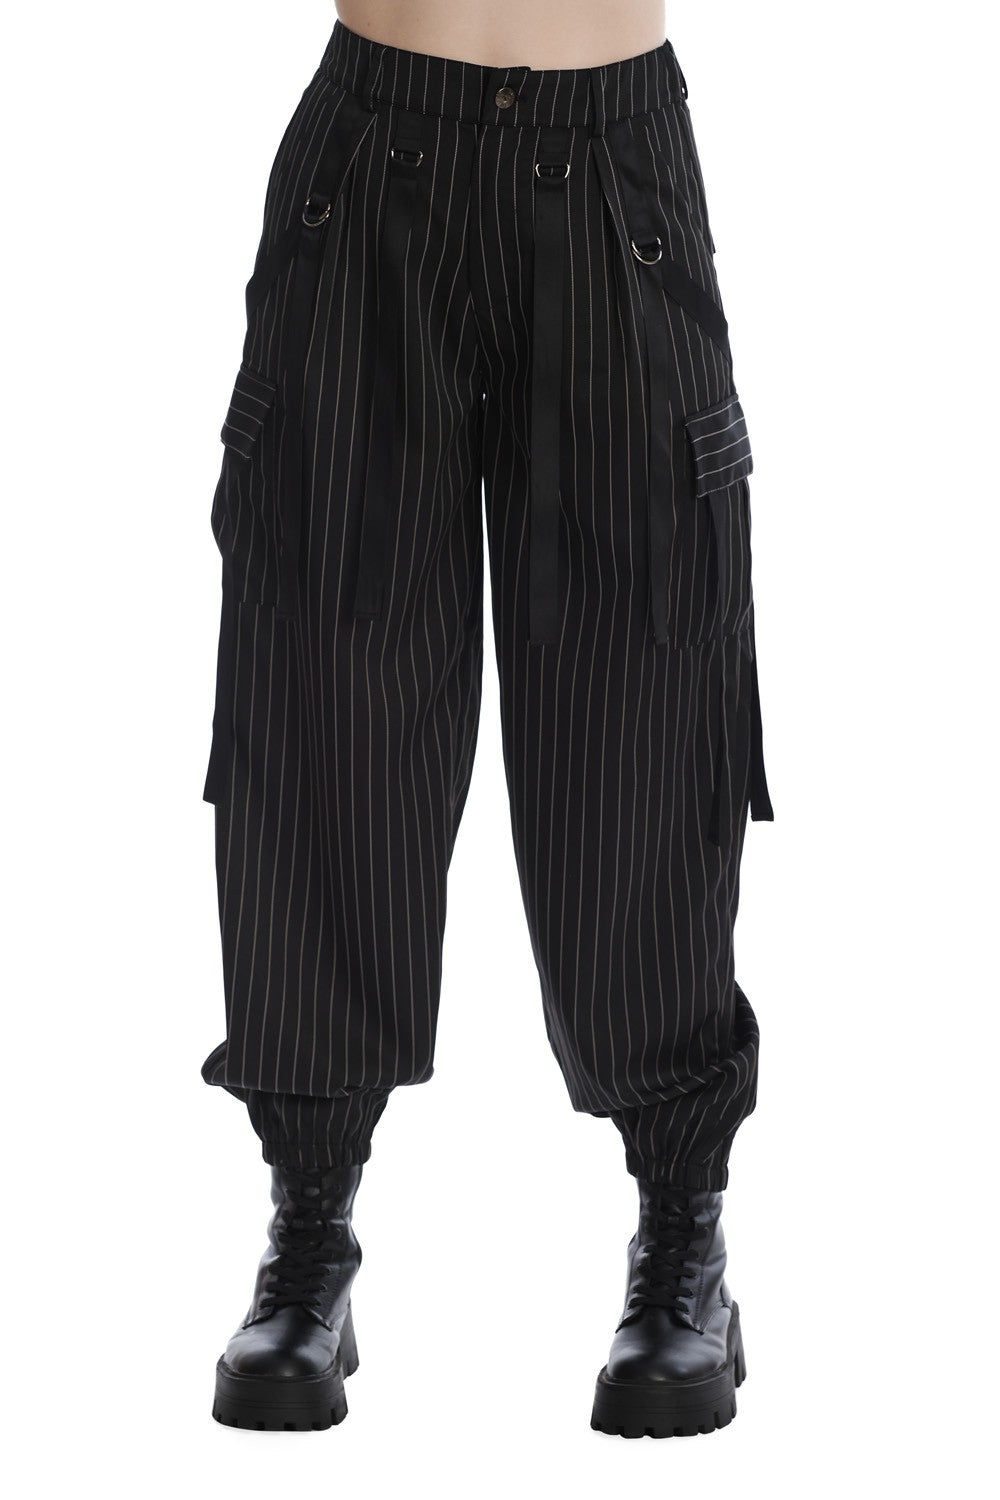 Banned Everlee Pinstripe Harem Gothic Harness Pants